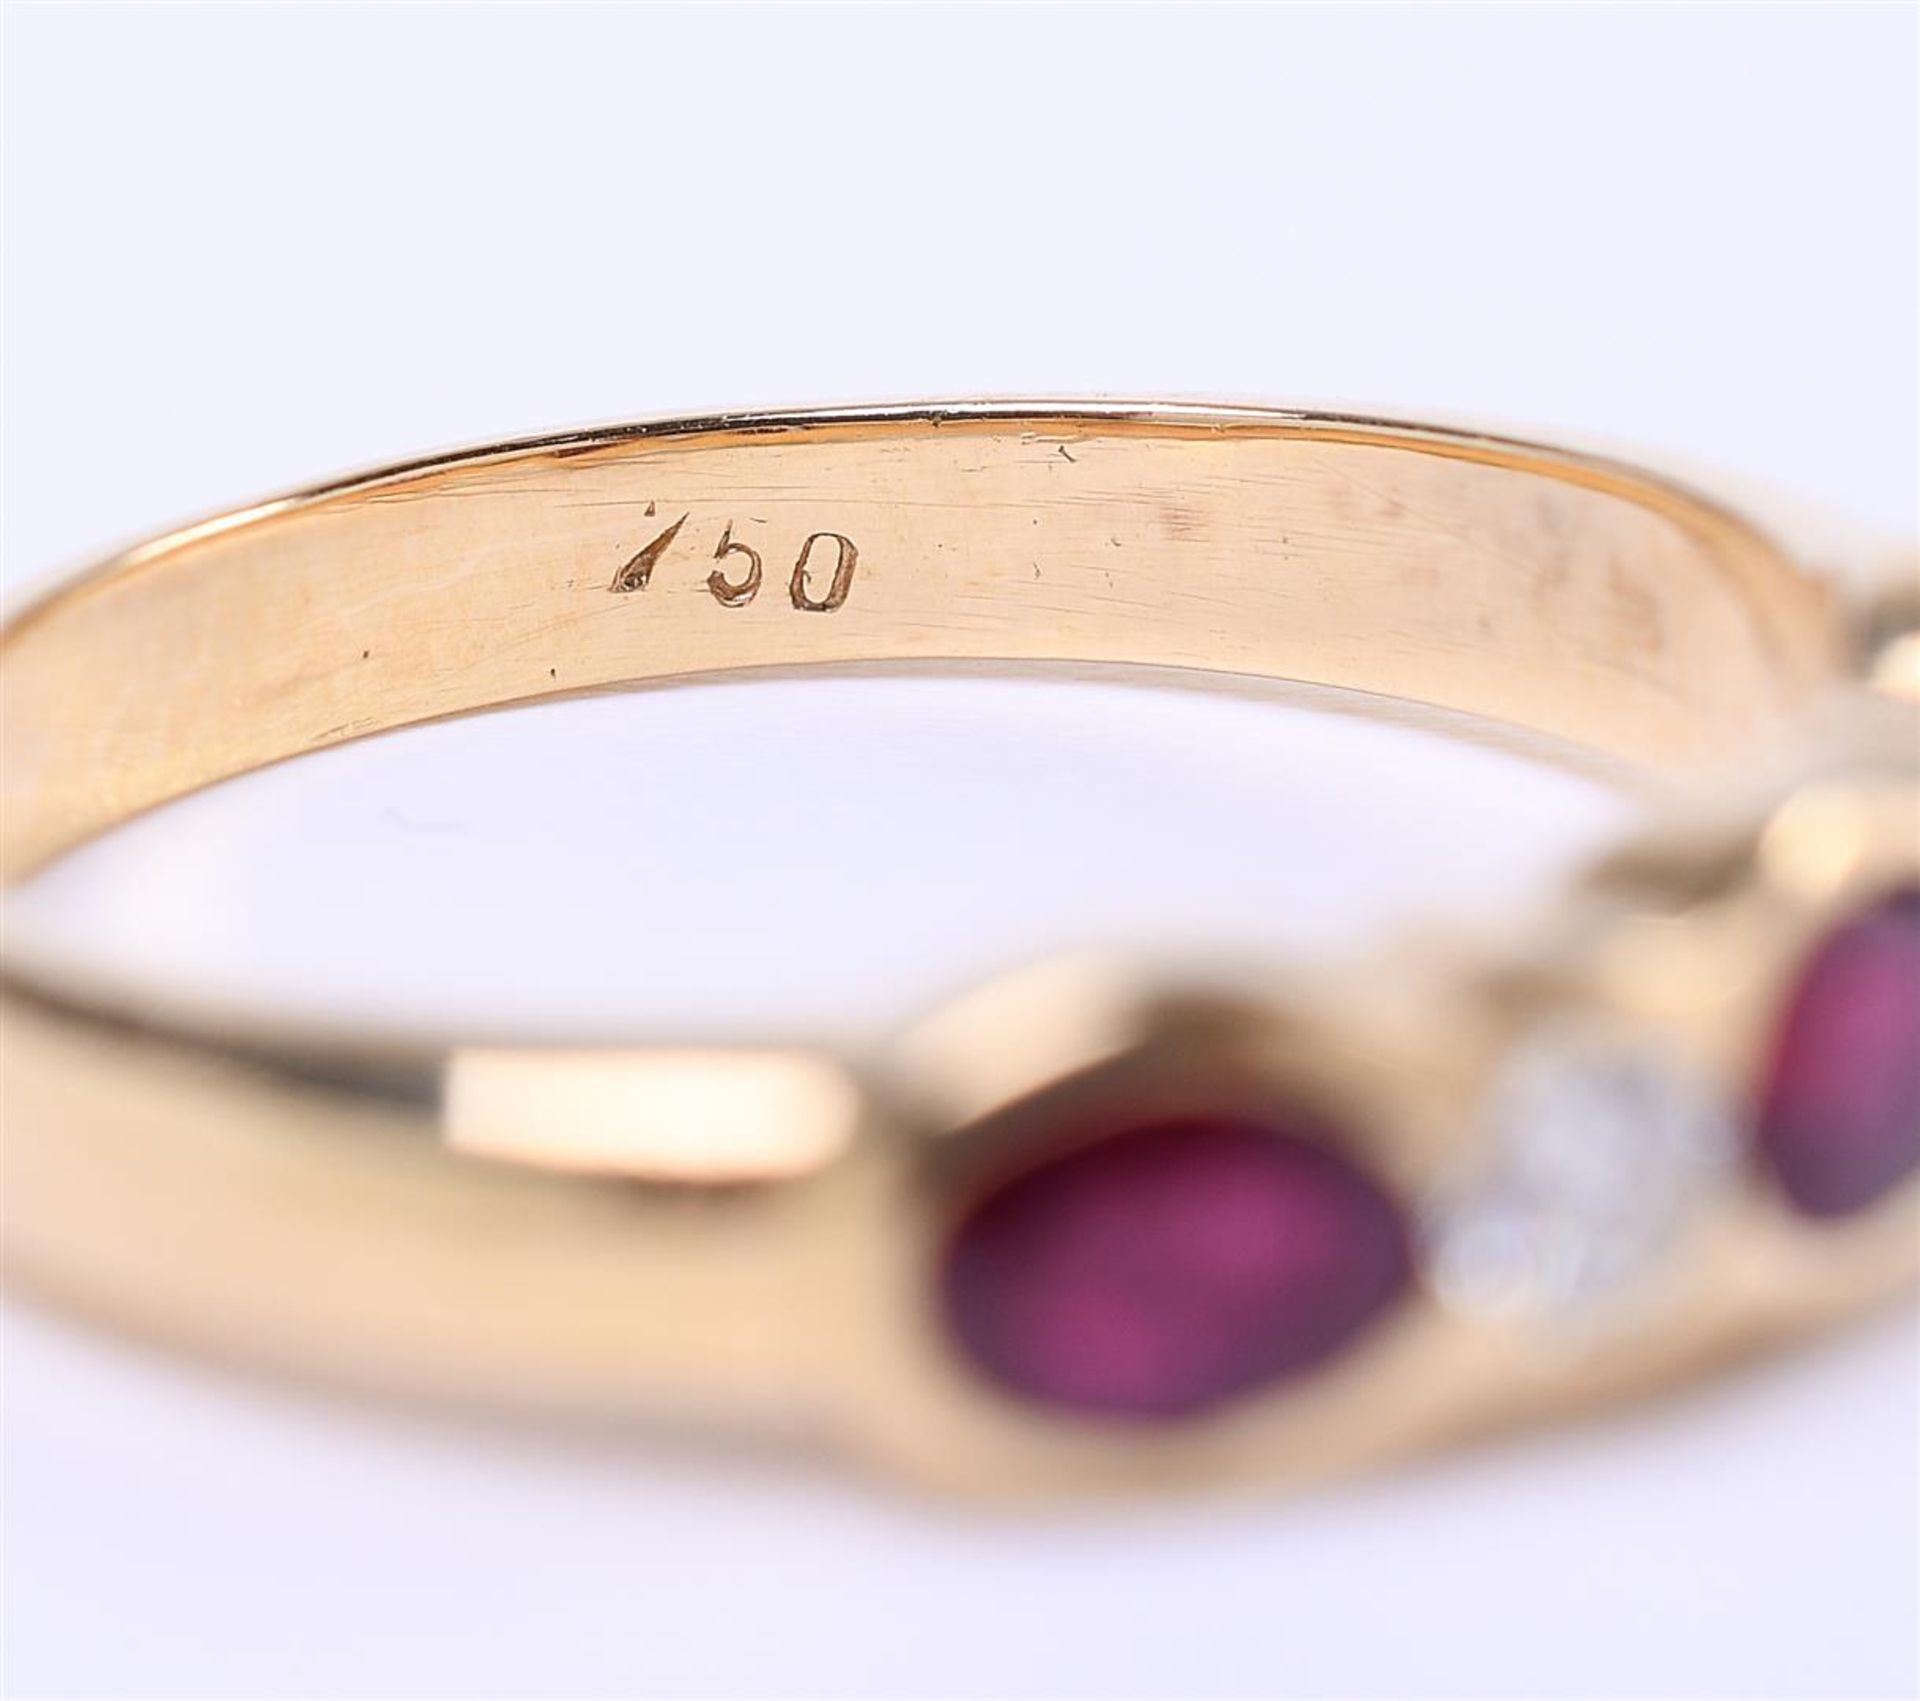 18 carat yellow gold ladies ring set with approximately 3 x oval cut rubies - Image 2 of 5